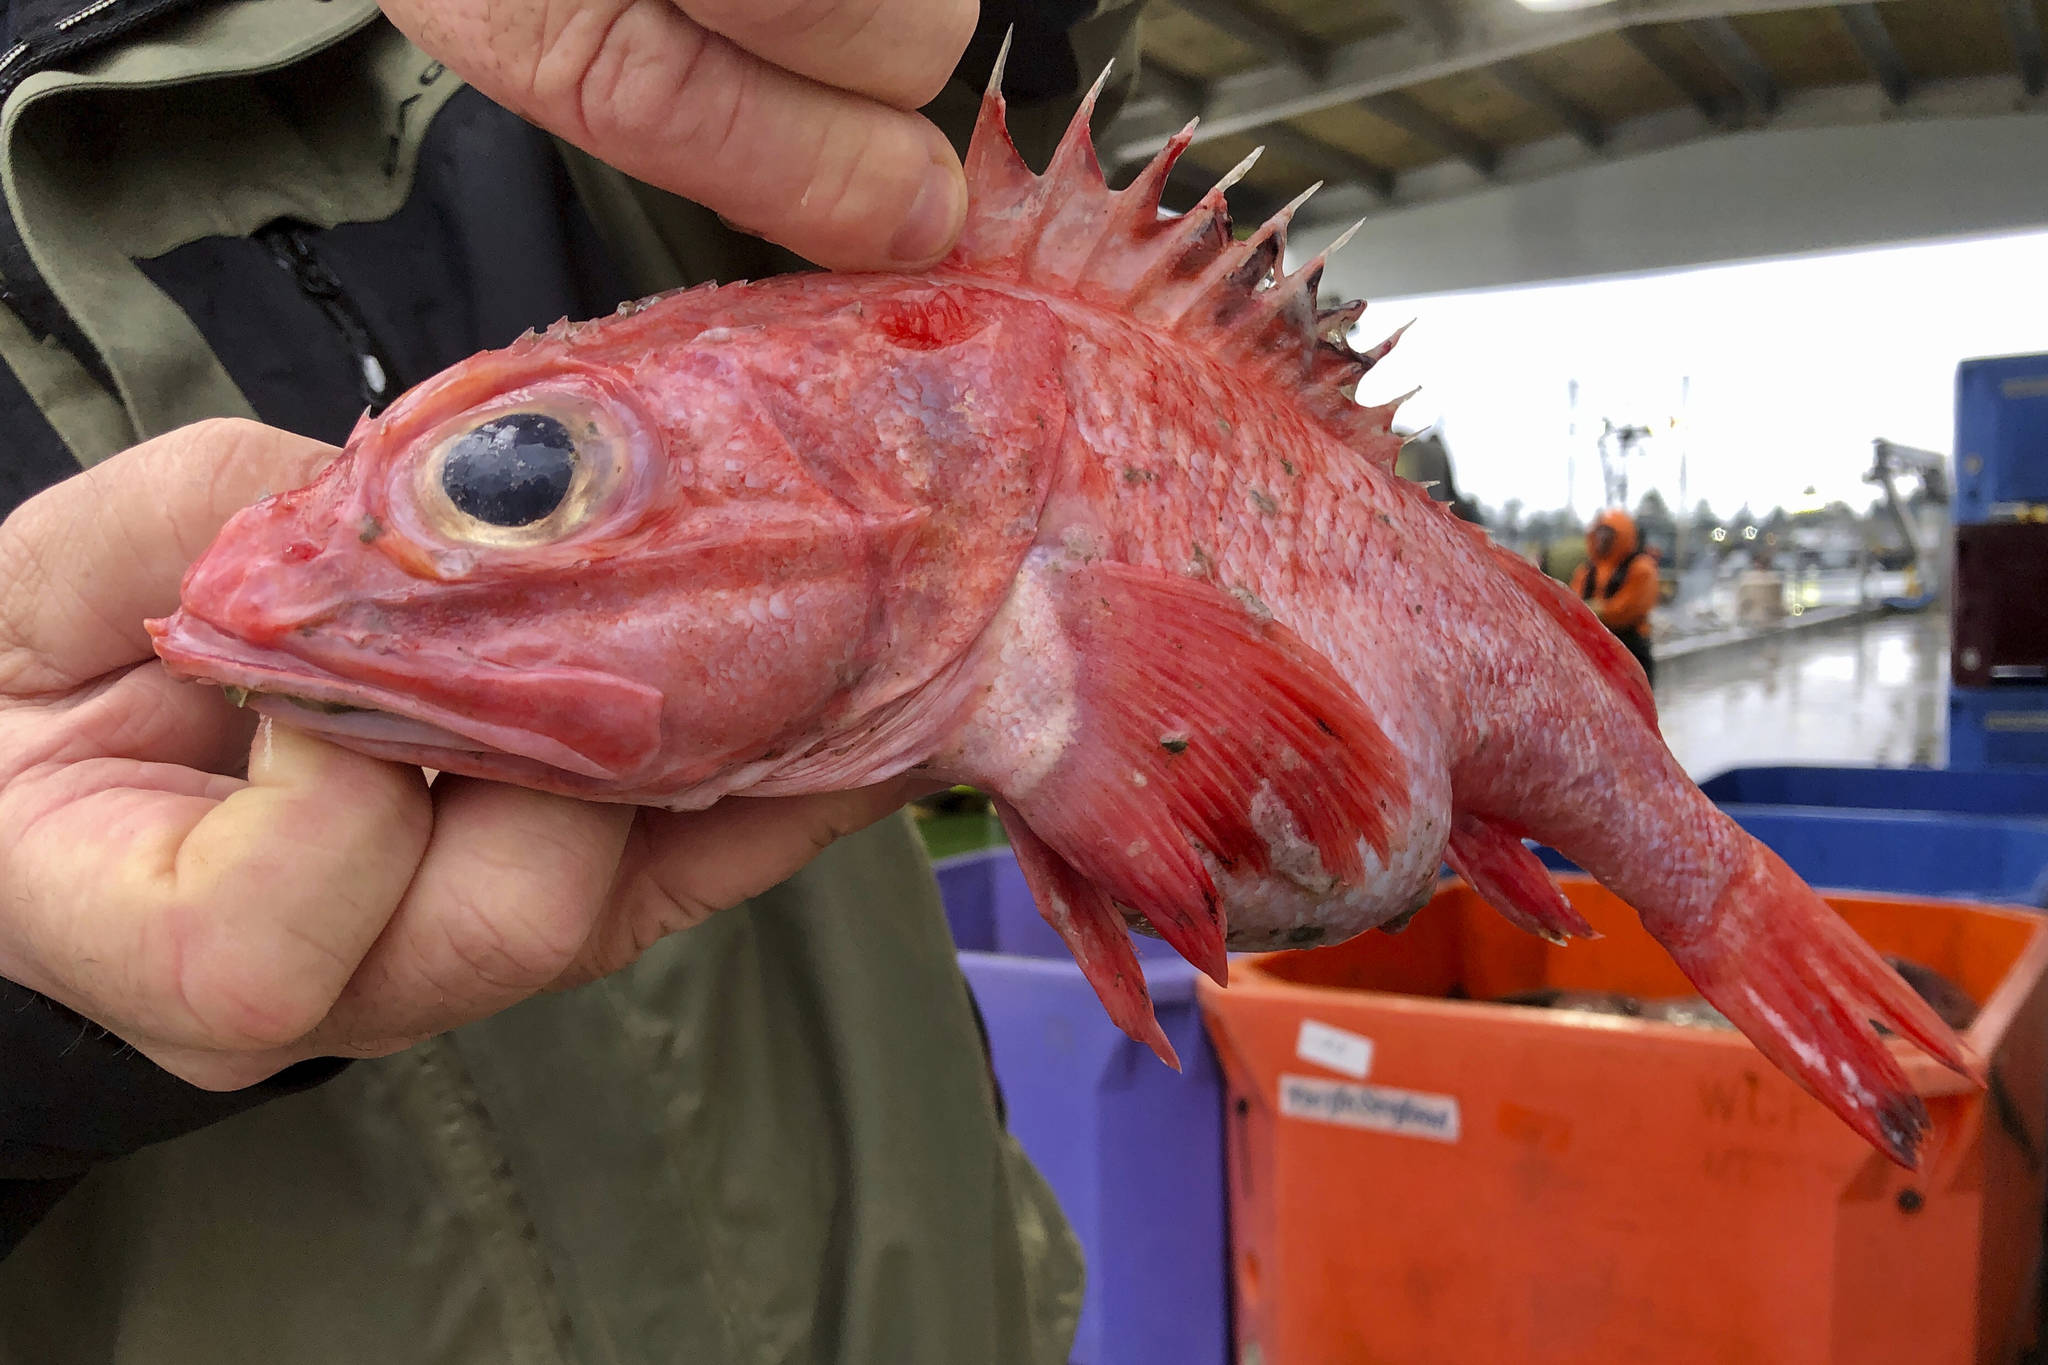 In this Dec. 11, 2019 photo, Kevin Dunn, who fishes off the coasts of Oregon and Washington, holds a rockfish at a processing facility in Warrenton, Oregon. A rare environmental success story is unfolding in waters off the U.S. West Coast as regulators in January 2020 are scheduled to reopen a large area off the coasts of Oregon and California to groundfish bottom trawling fishing less than two decades after authorities closed huge stretches of the Pacific Ocean due to the species’ depletion. (AP Photo/Gillian Flaccus)